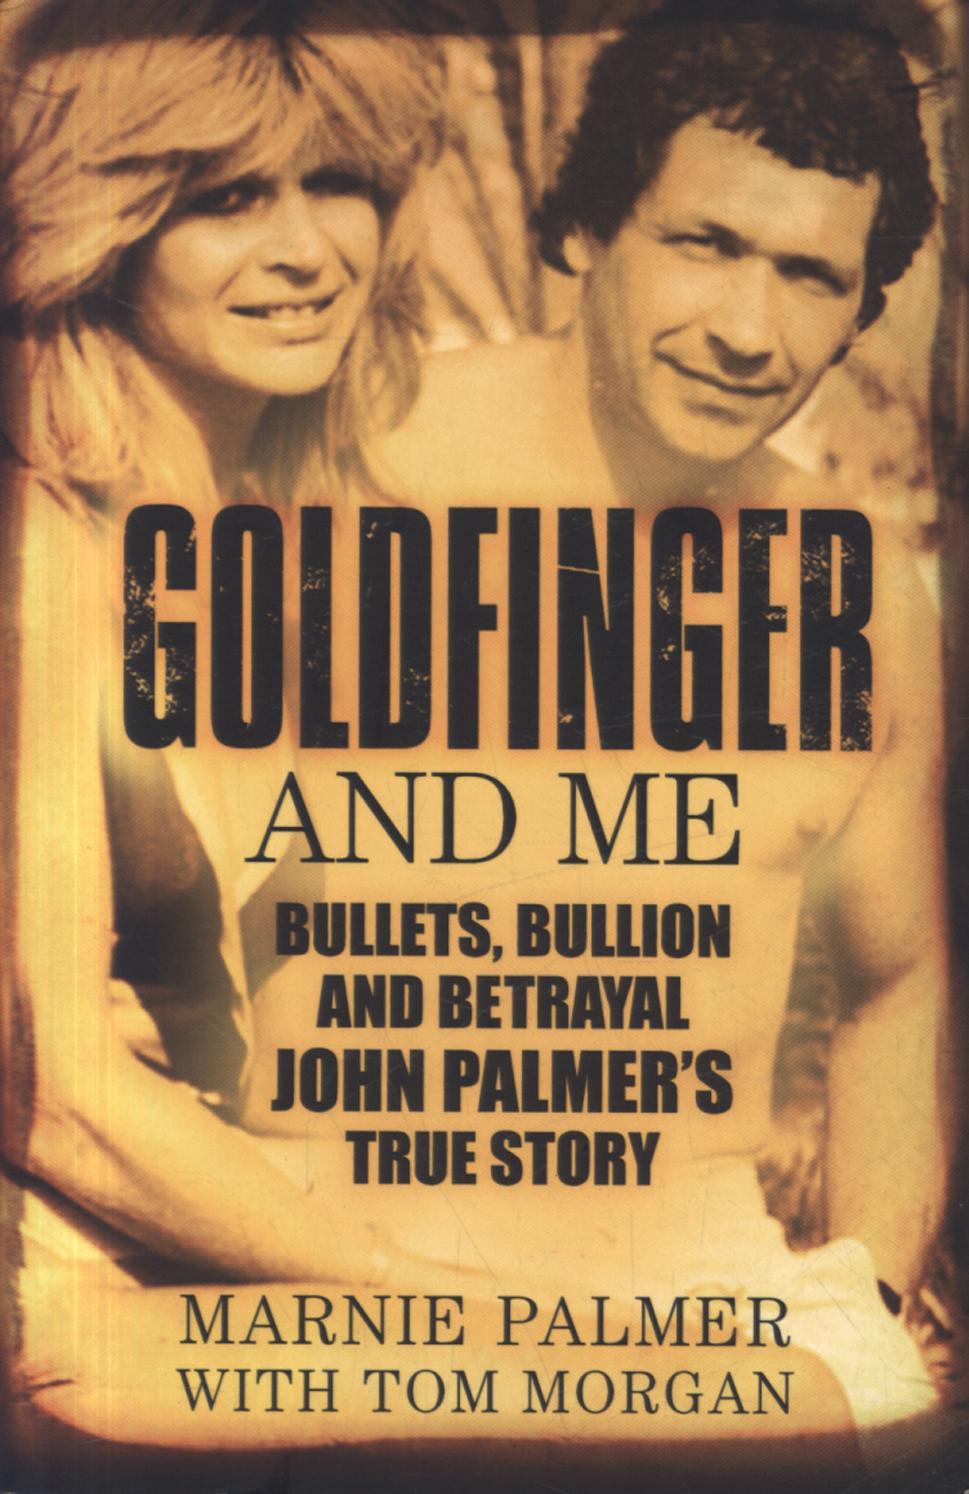 Goldfinger and Me